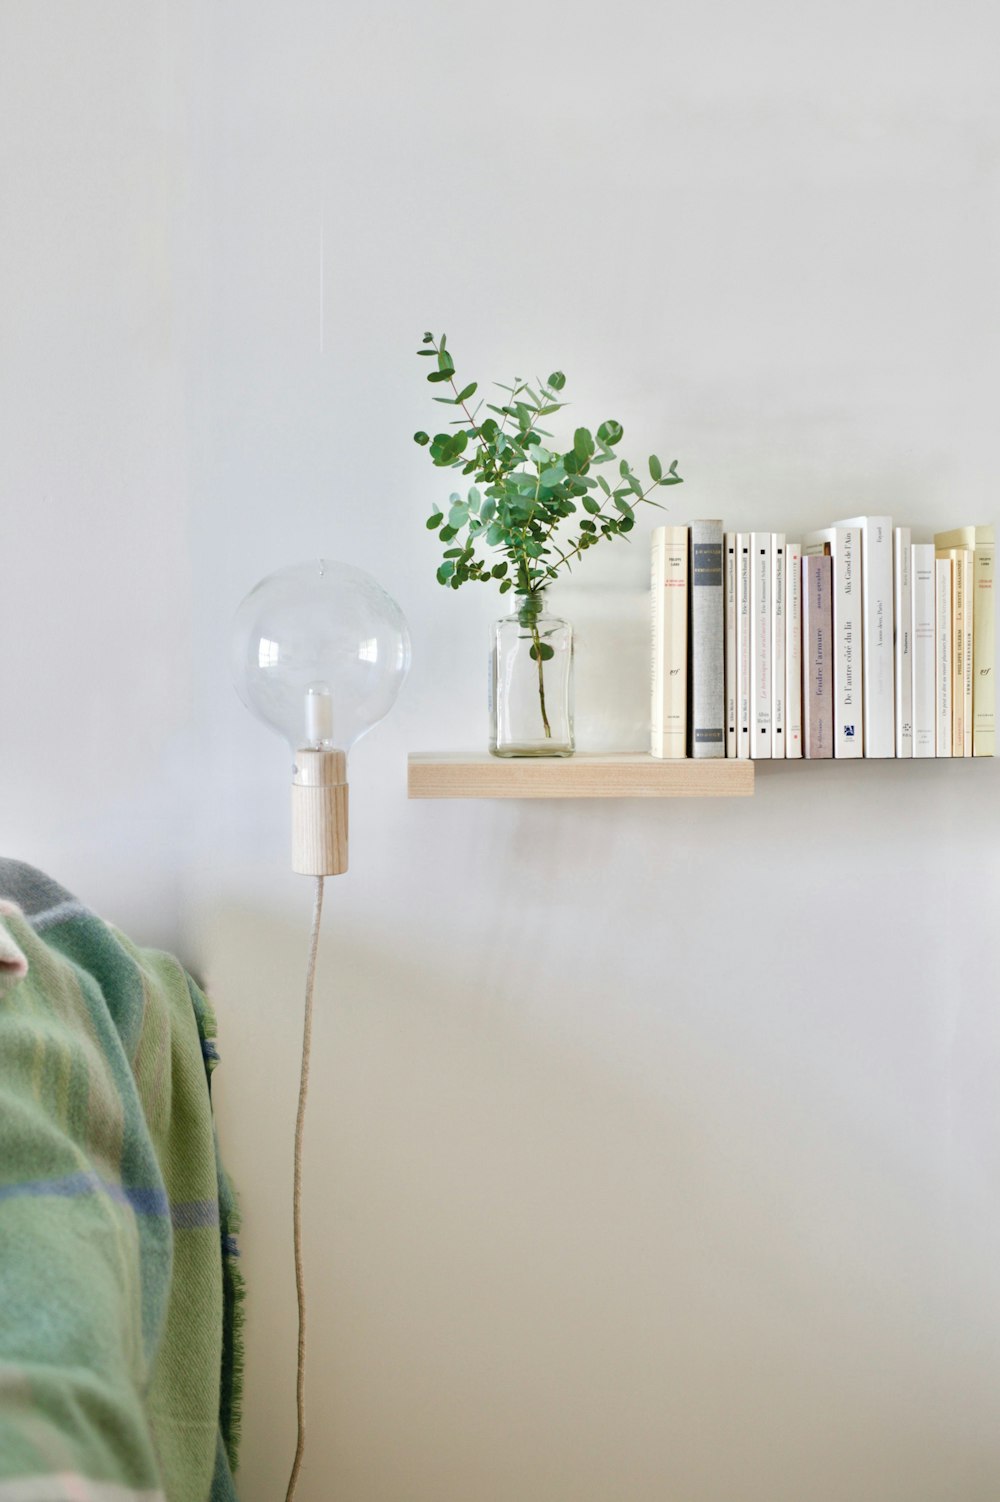 a shelf with books and a plant on it